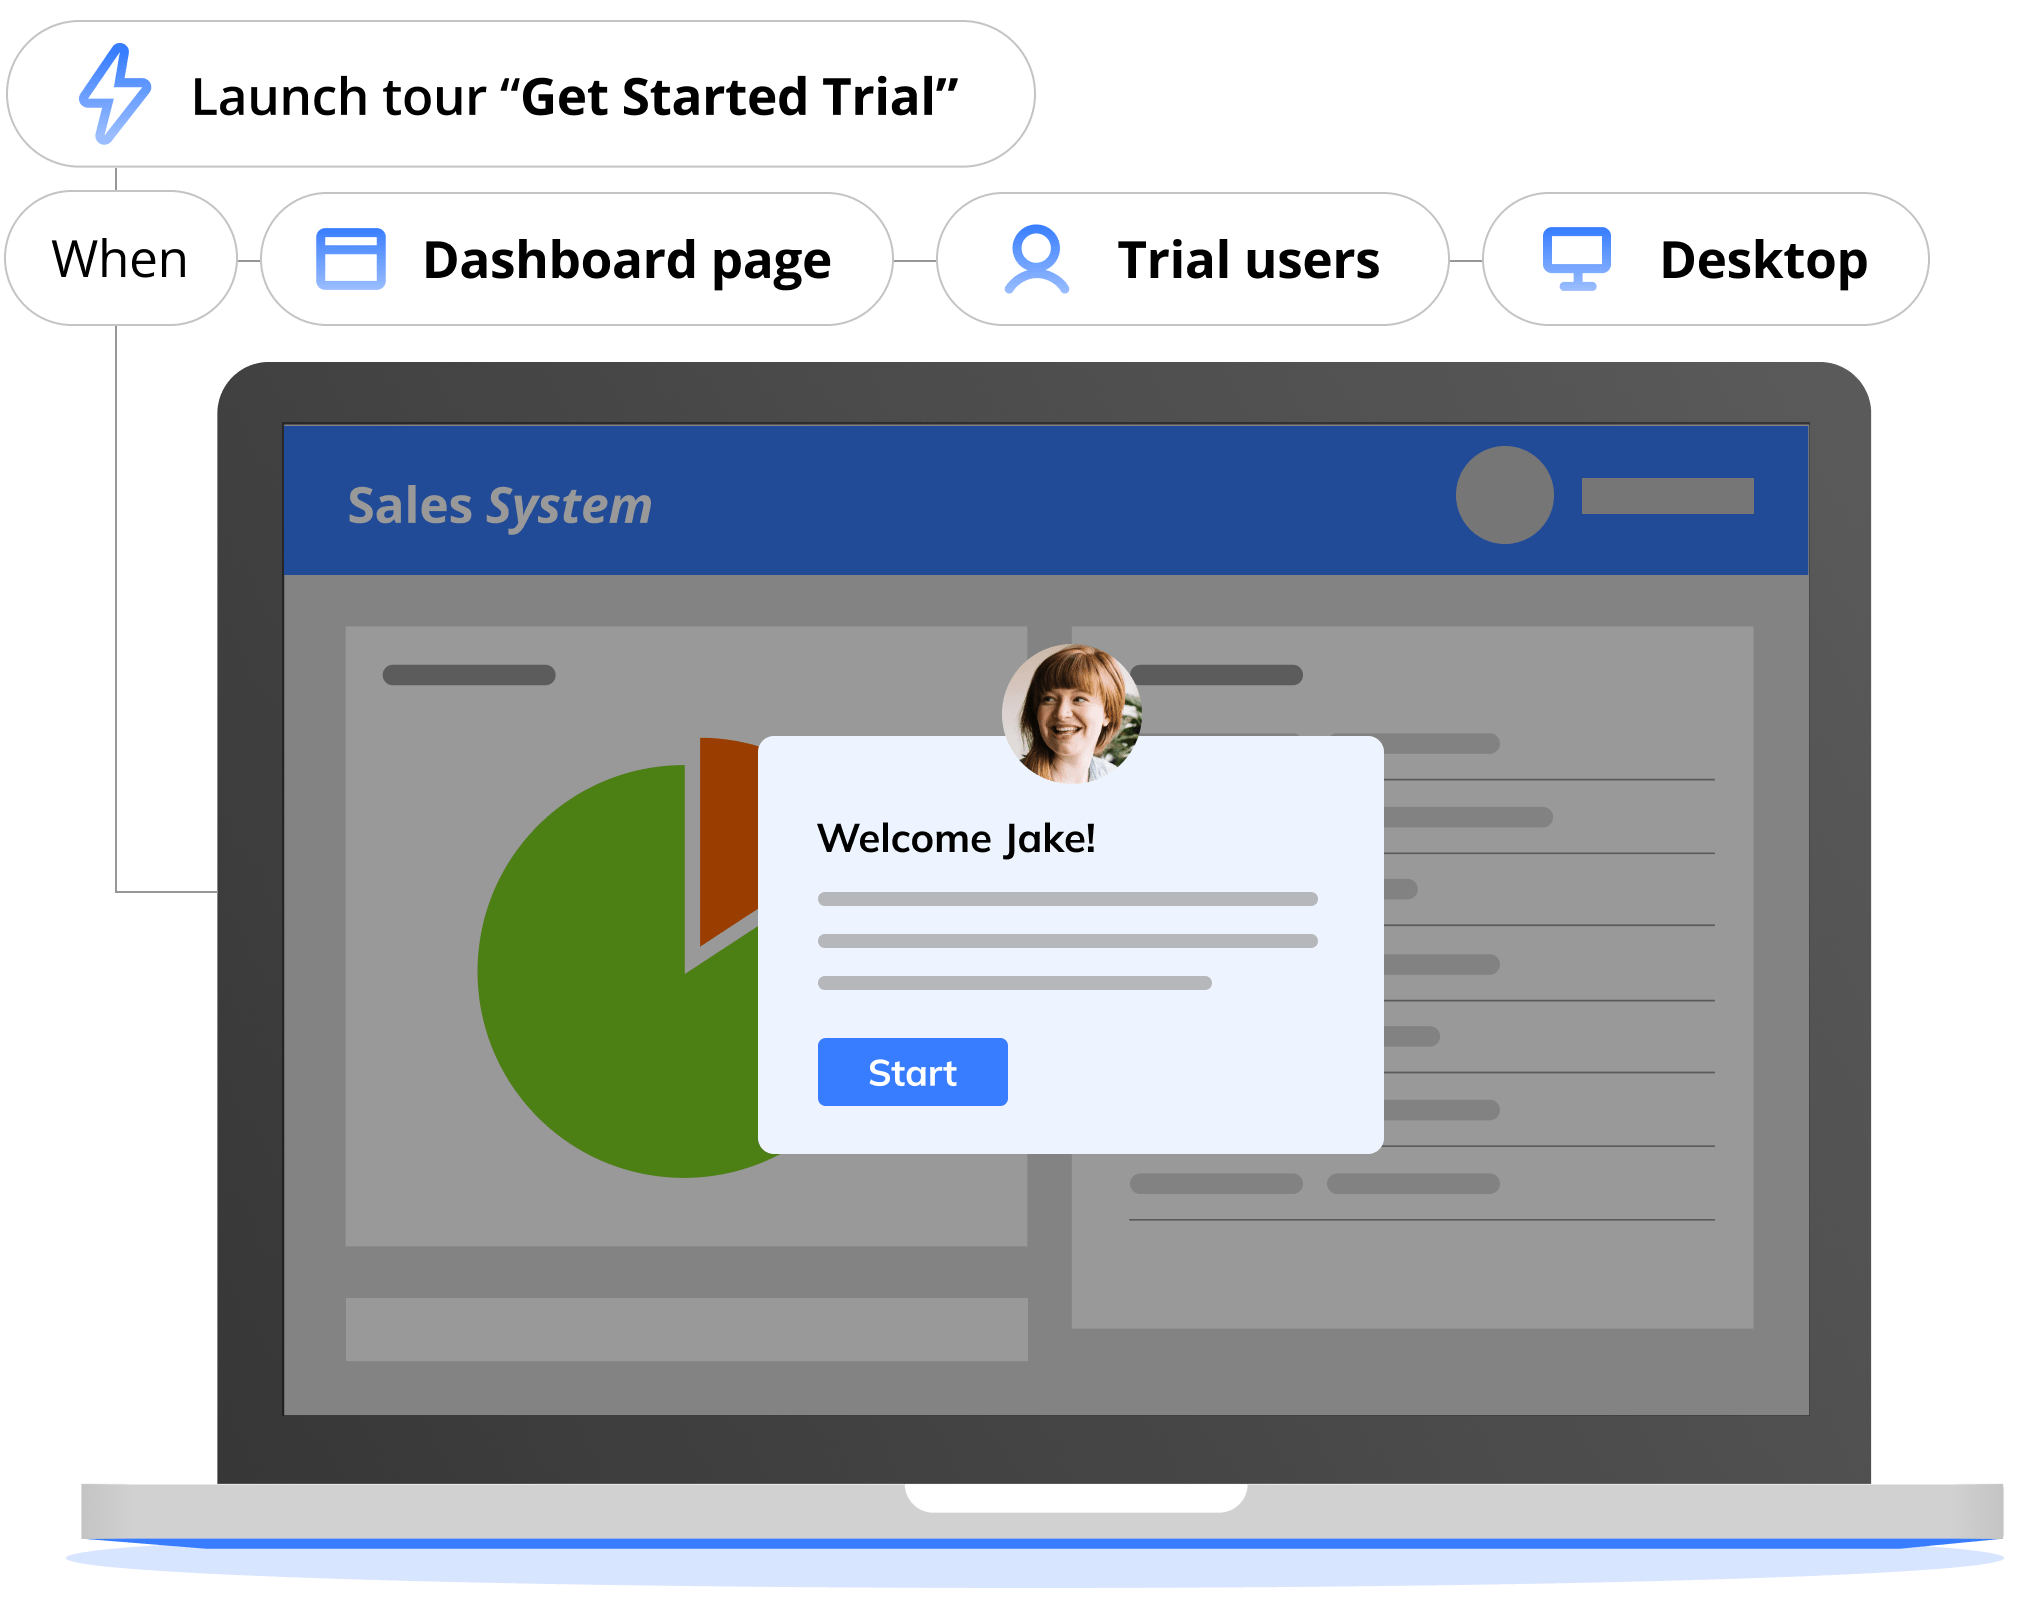 User onboarding in the right context